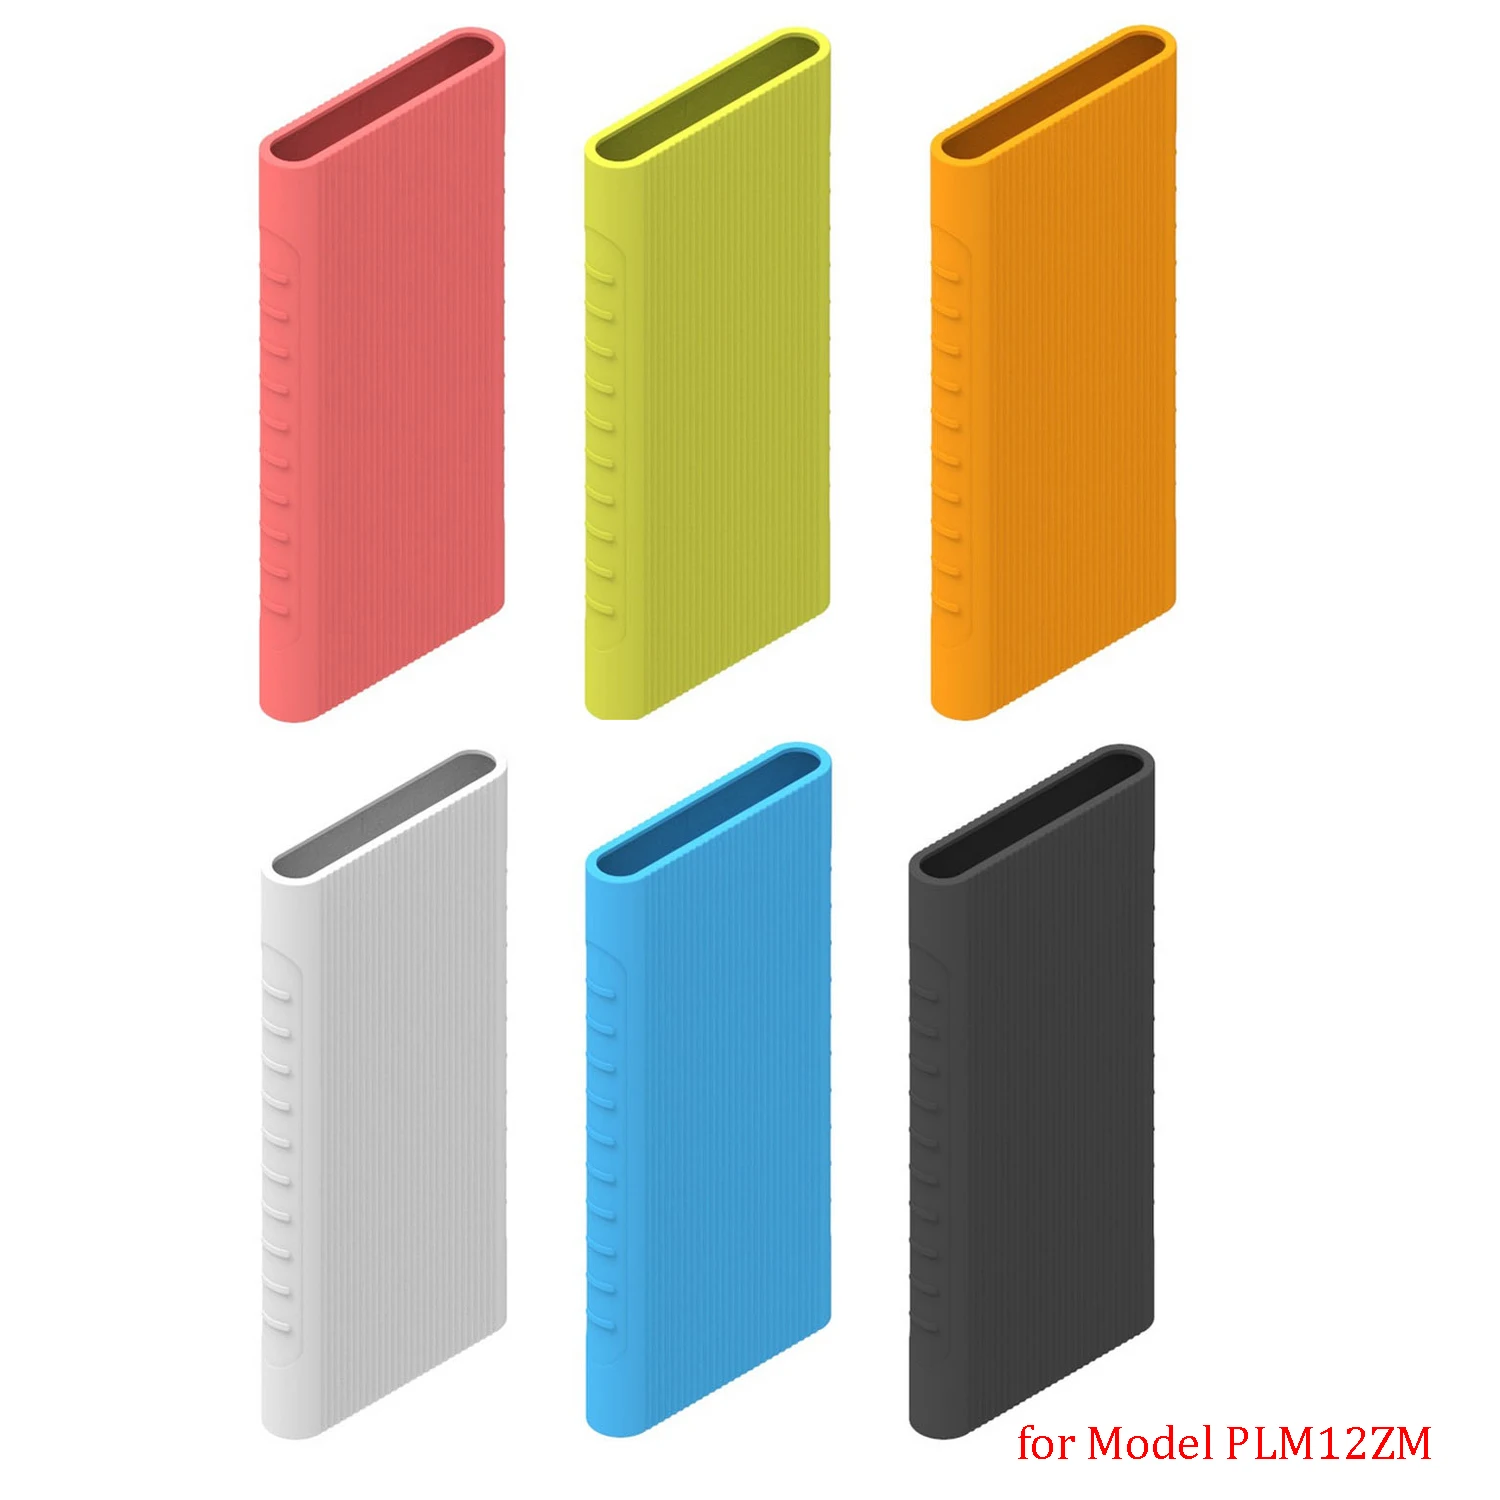 

Besegad Soft Silicone Protective Case Cover Shell Sleeve for 2019 NEW Xiaomi Mi Power Bank 3 10000mAh Power Bank PLM12ZM Gadgets